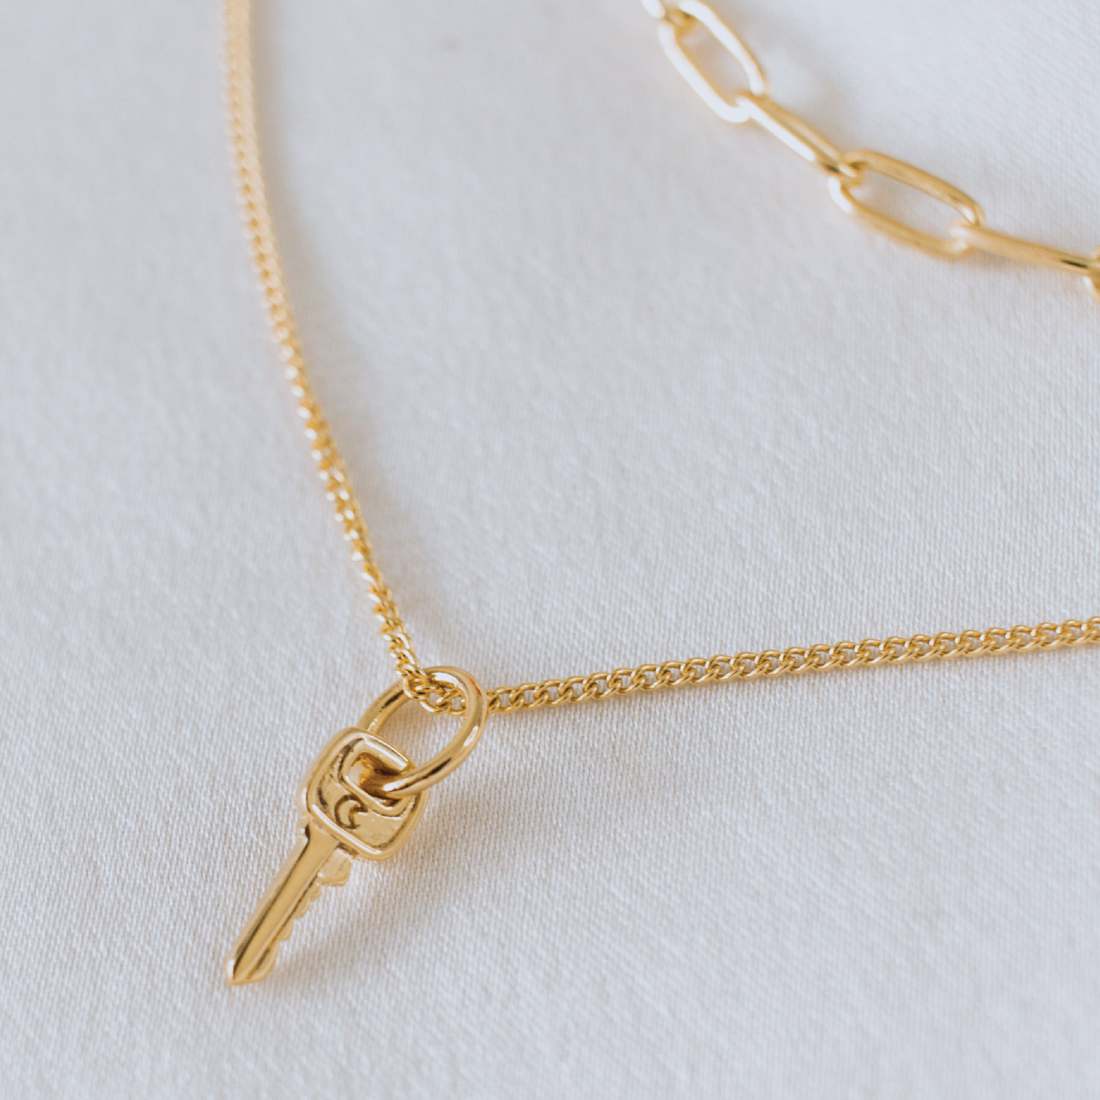 Lock and Key Necklace, Gold Friendship Necklace, Anniversary Gift, Best Friend Necklace, Love Necklace, Key Necklace, Couples Necklace